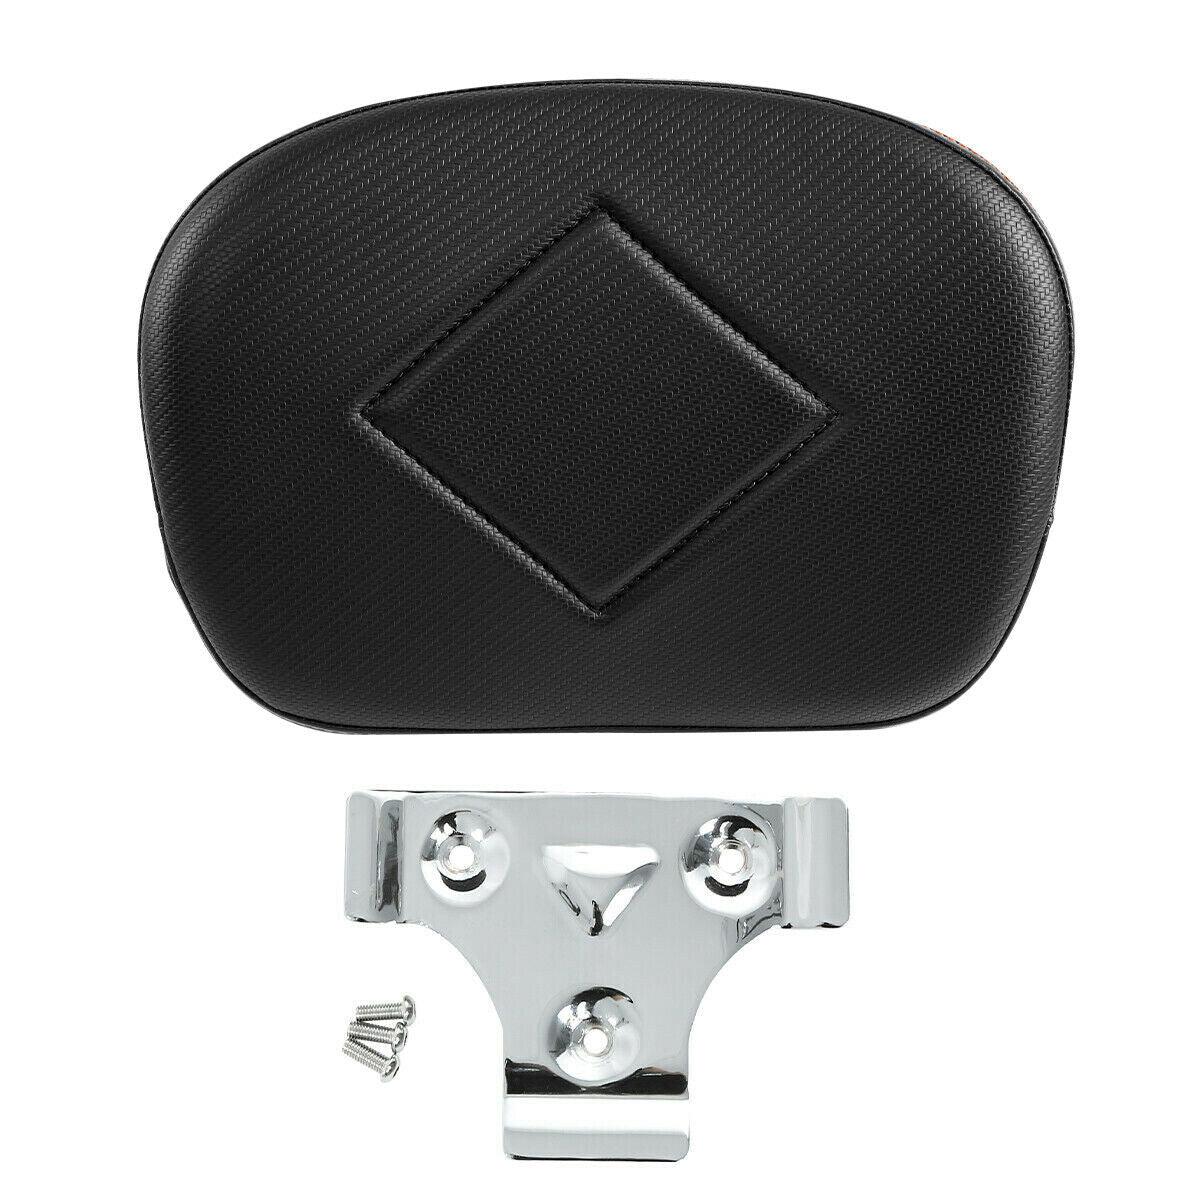 Black Sissy Bar Passenger Pad Fit For Harley Touring Street Road Glide Softail - Moto Life Products